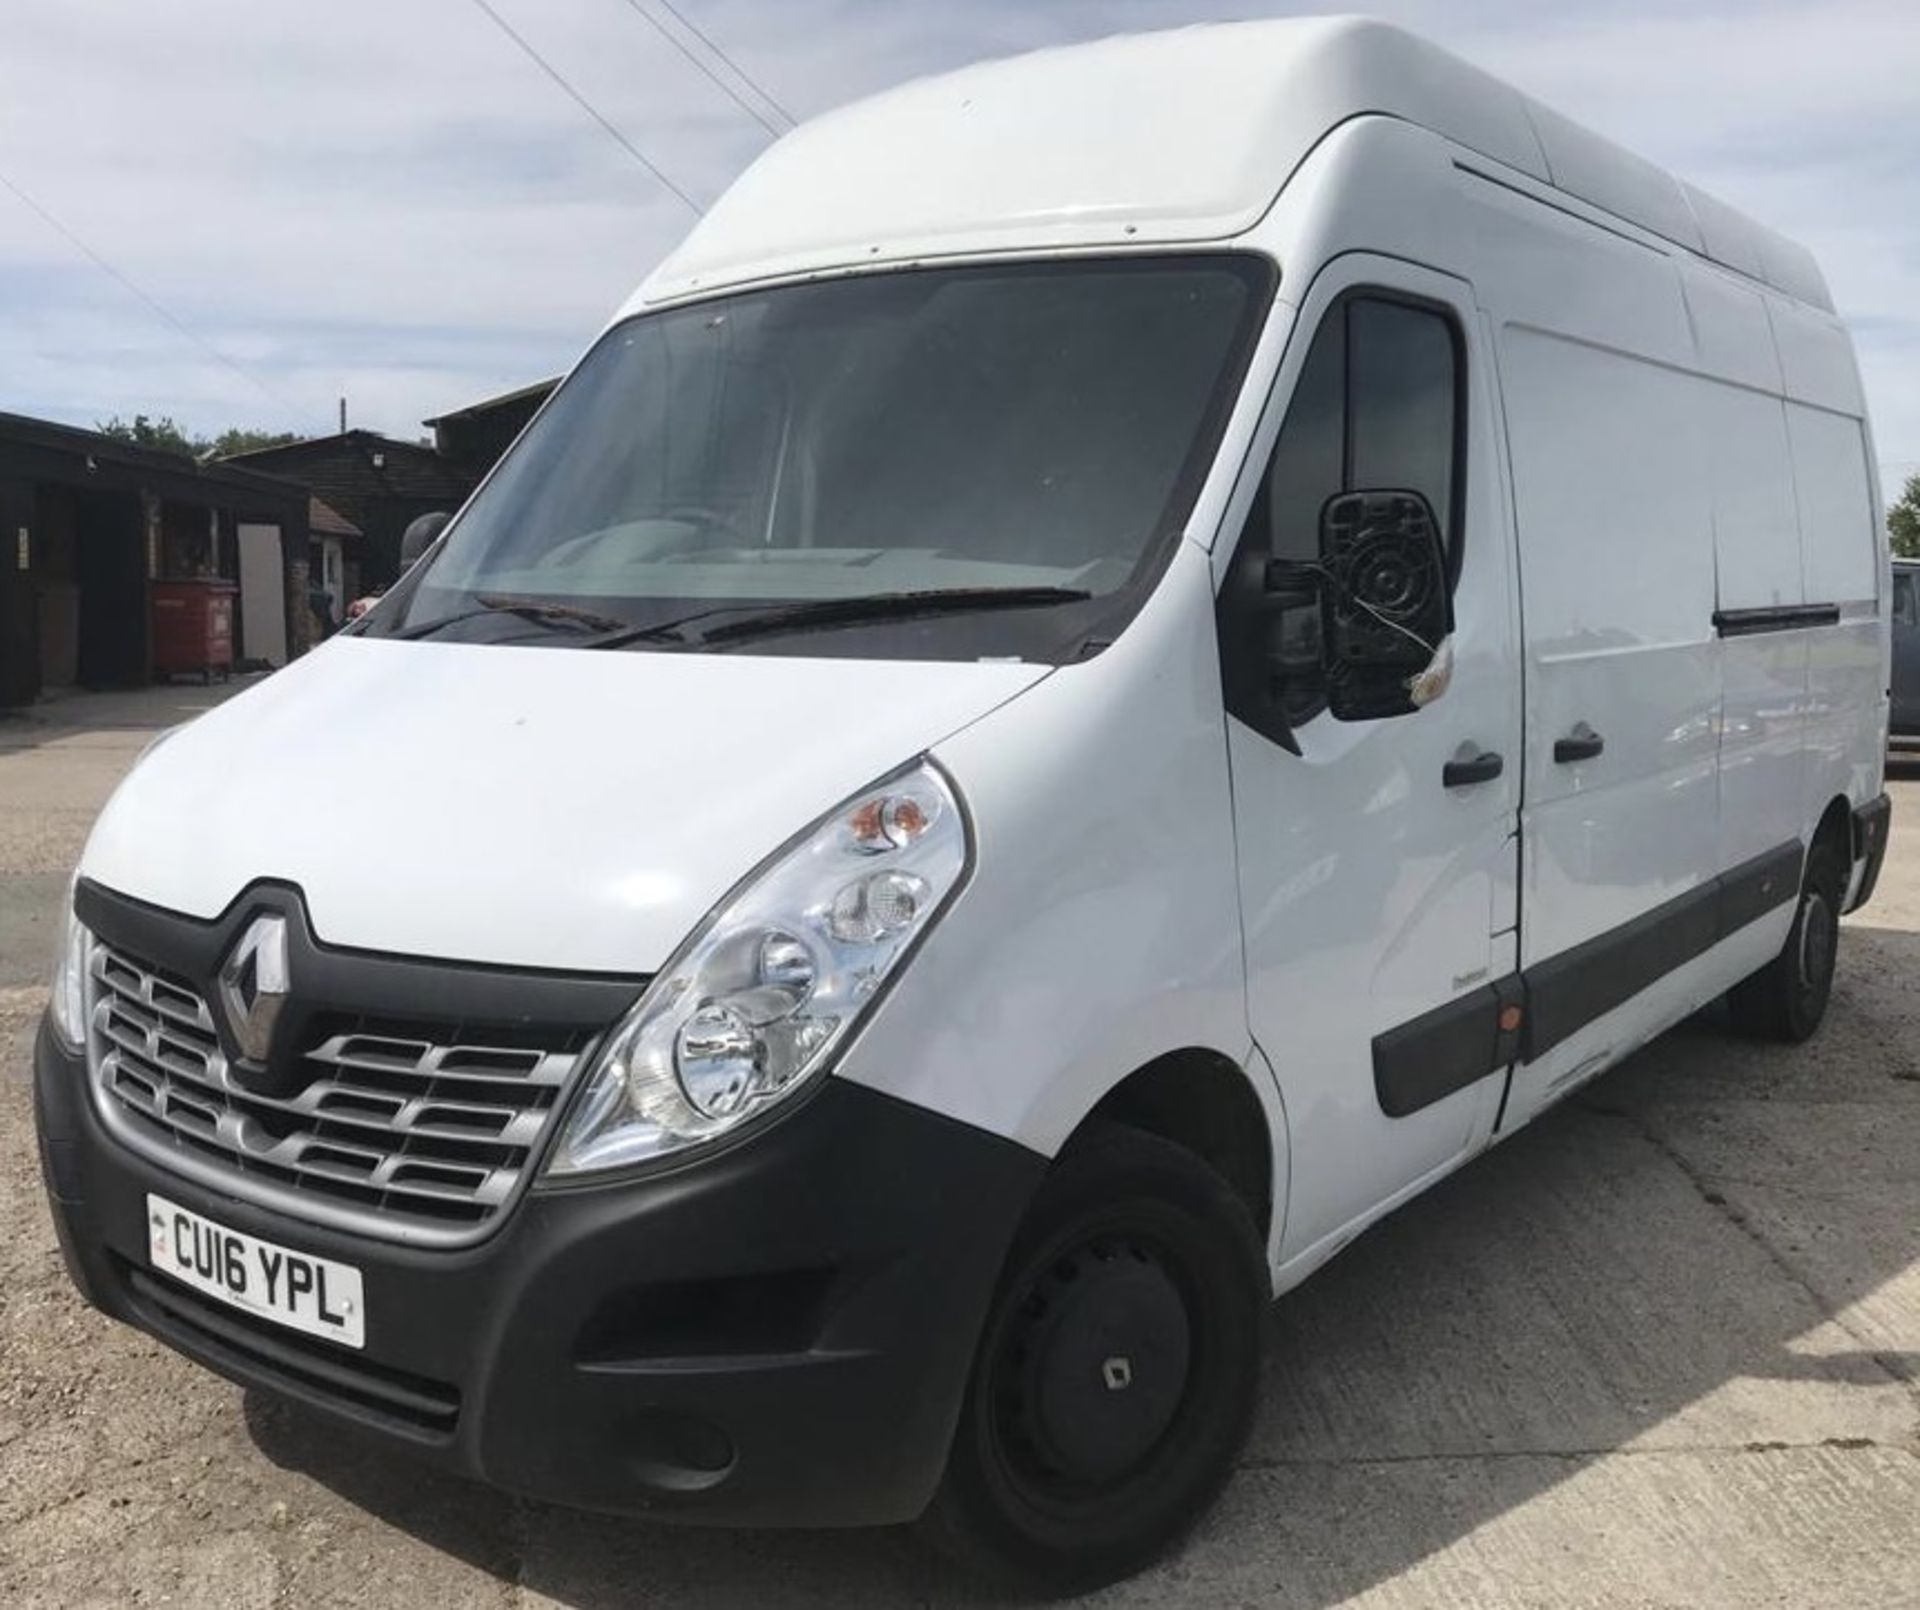 Renault Master LH35 Business CDI Panel Van, Registration CU16 YPL, First Registered 14th May 2016, O - Image 2 of 14